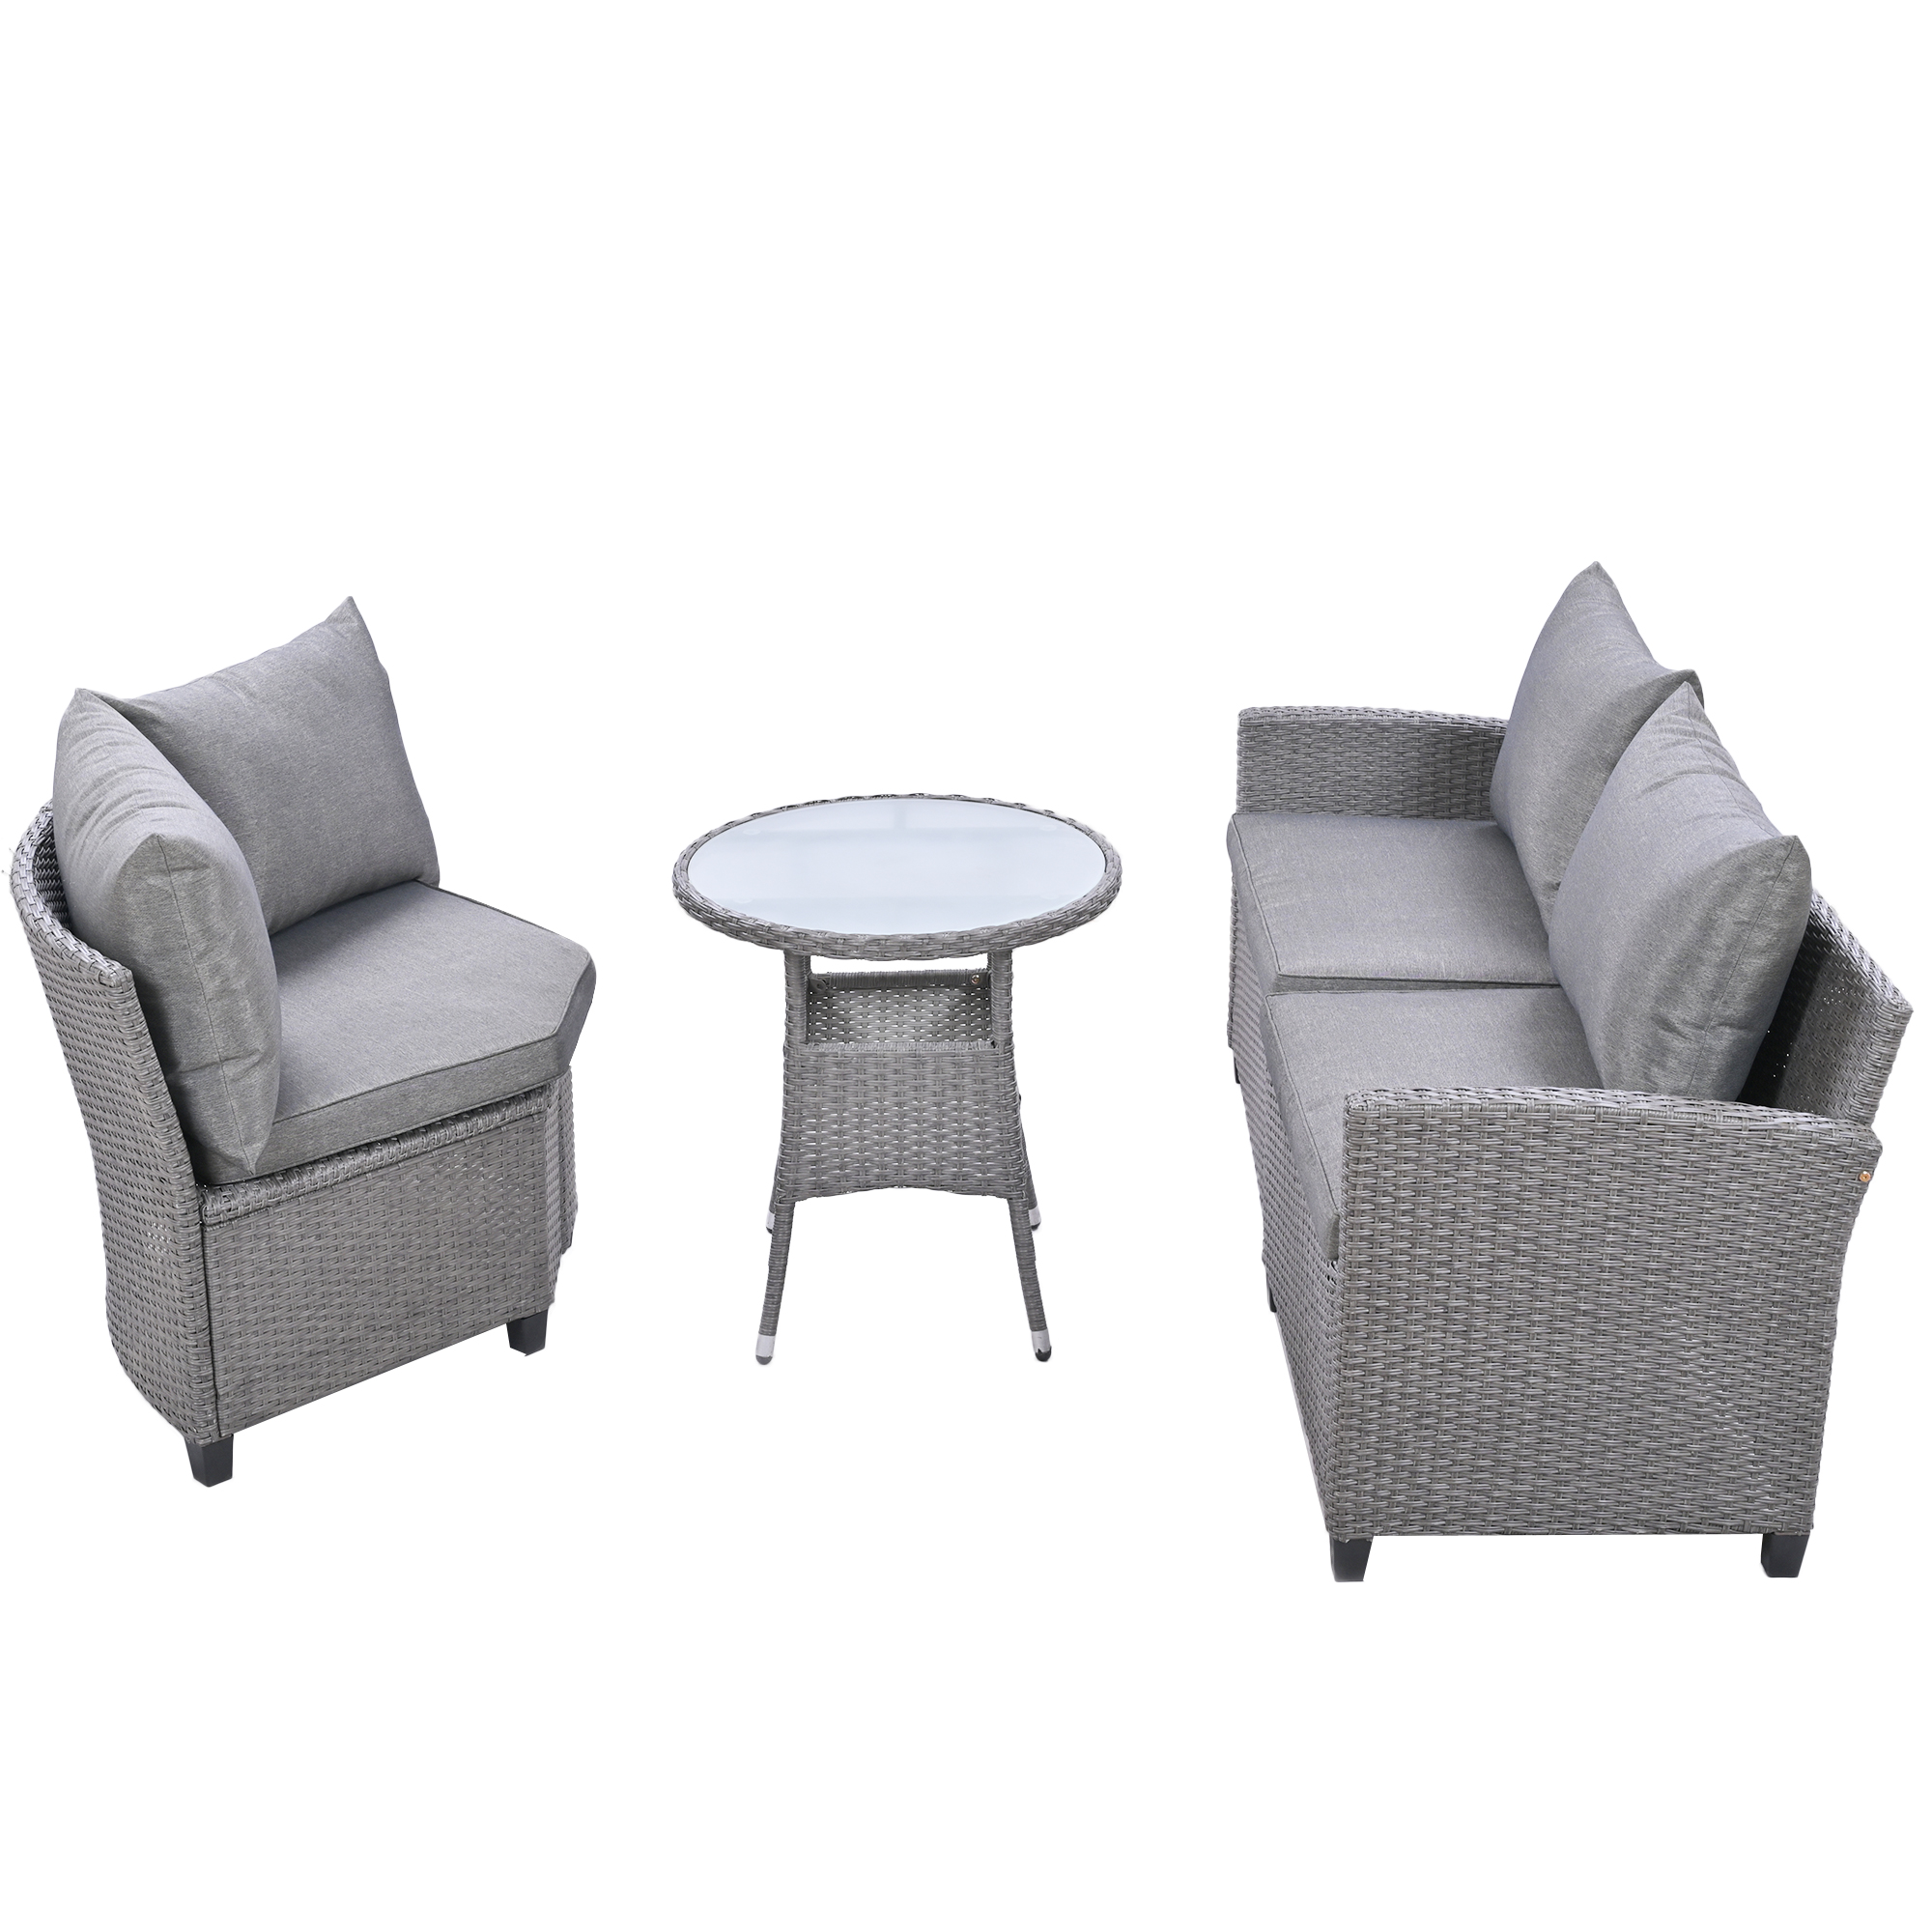 Clearance! Outdoor Bistro Conversation Set, Patio Wicker Sofa Set with Removable Cushions, Modern Outdoor Sectional Sets with Round Glass Coffee Table for Pool Garden Backyard, 650lbs, Gray, S1998 - image 3 of 9